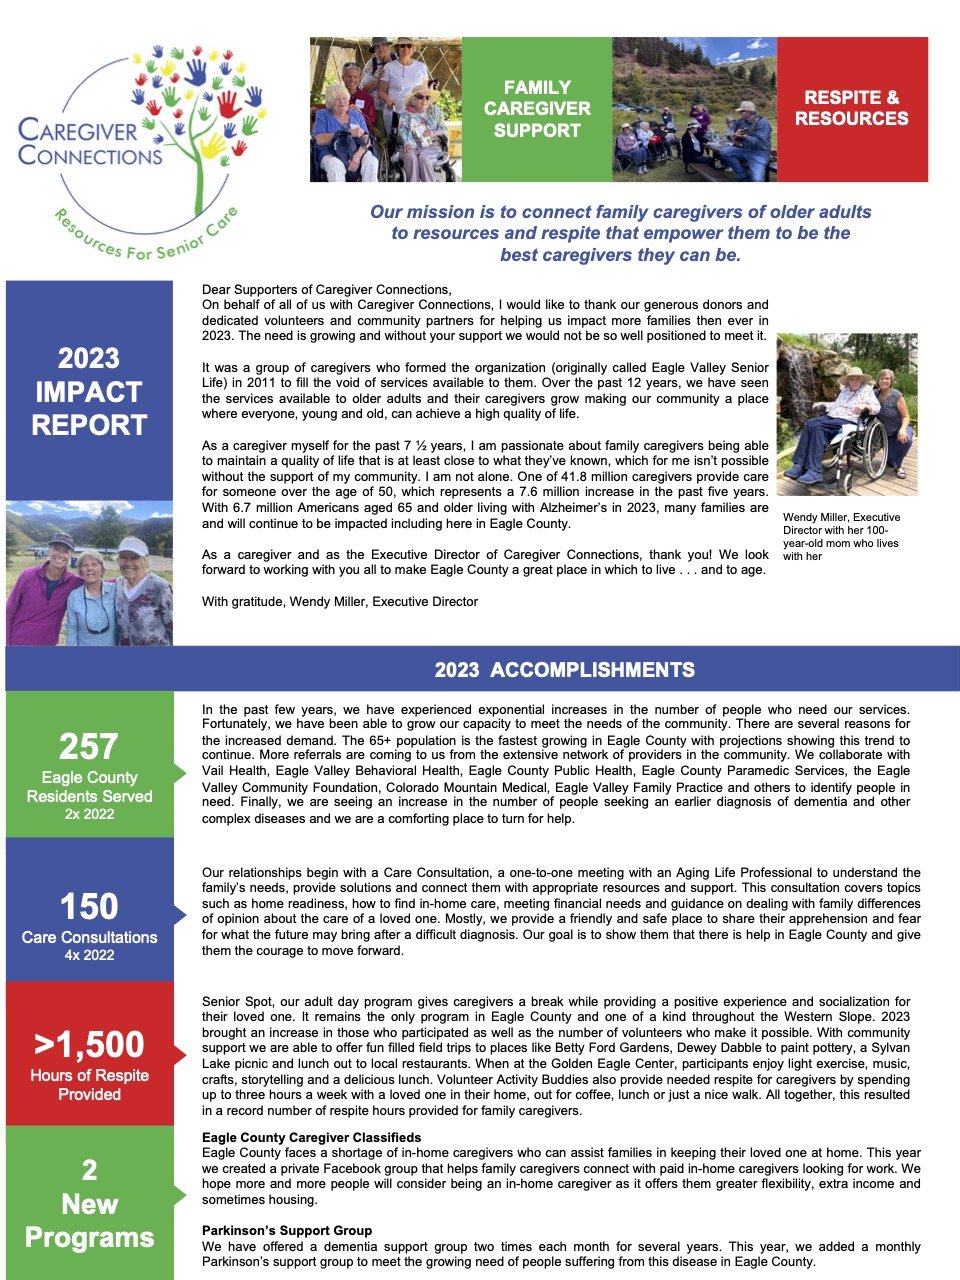 2023 Caregiver Connections Impact Report.jpg